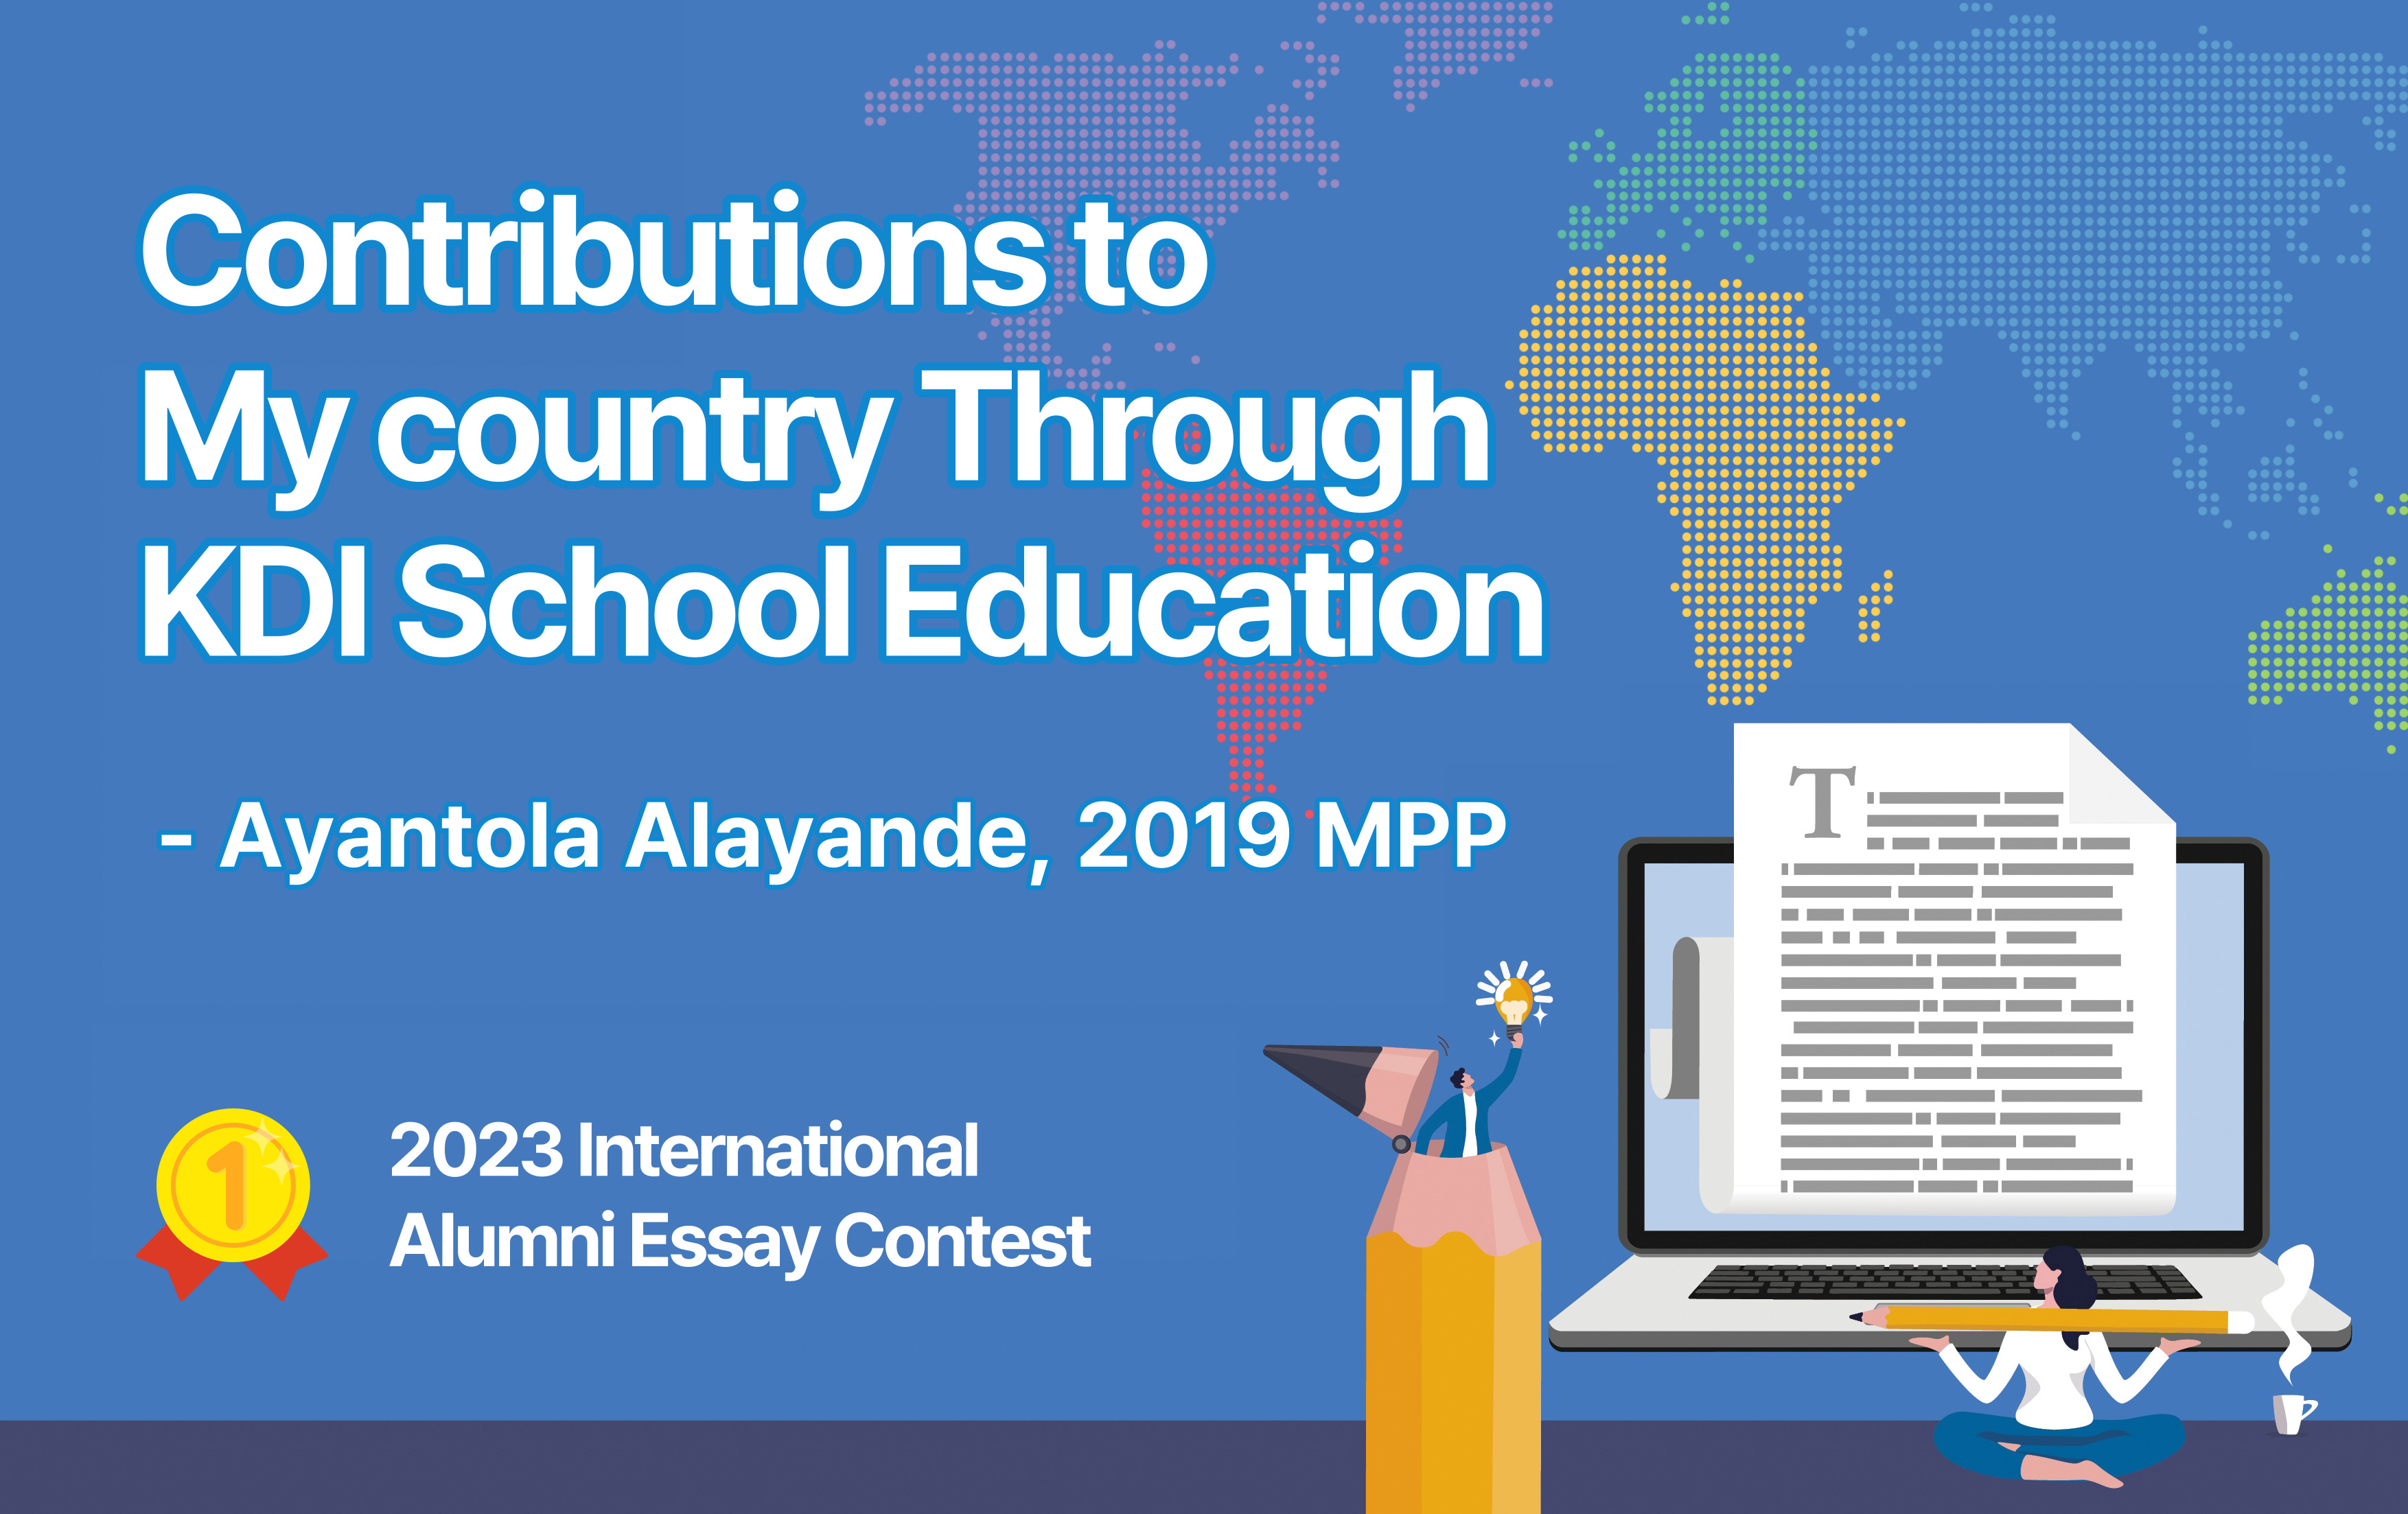 Contributions to My Country through KDI School Education (Ayantola Alayande, 2019 MPP)